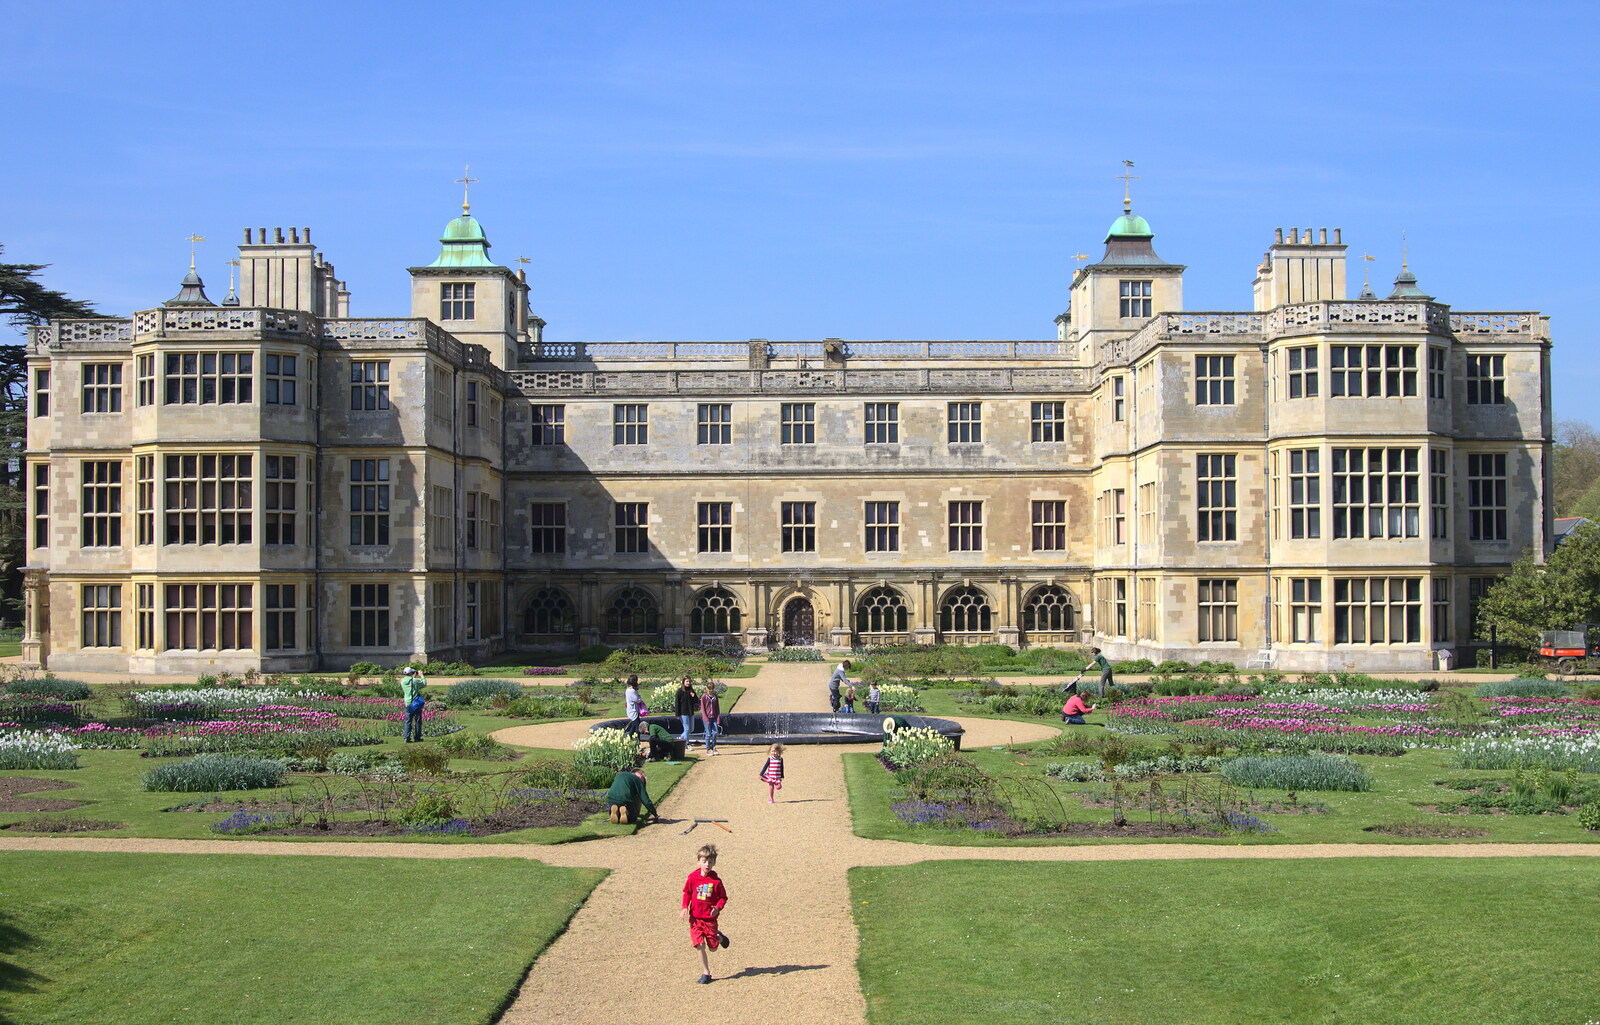 The impressive aspect of Audley End House from A Trip to Audley End House, Saffron Walden, Essex - 16th April 2014